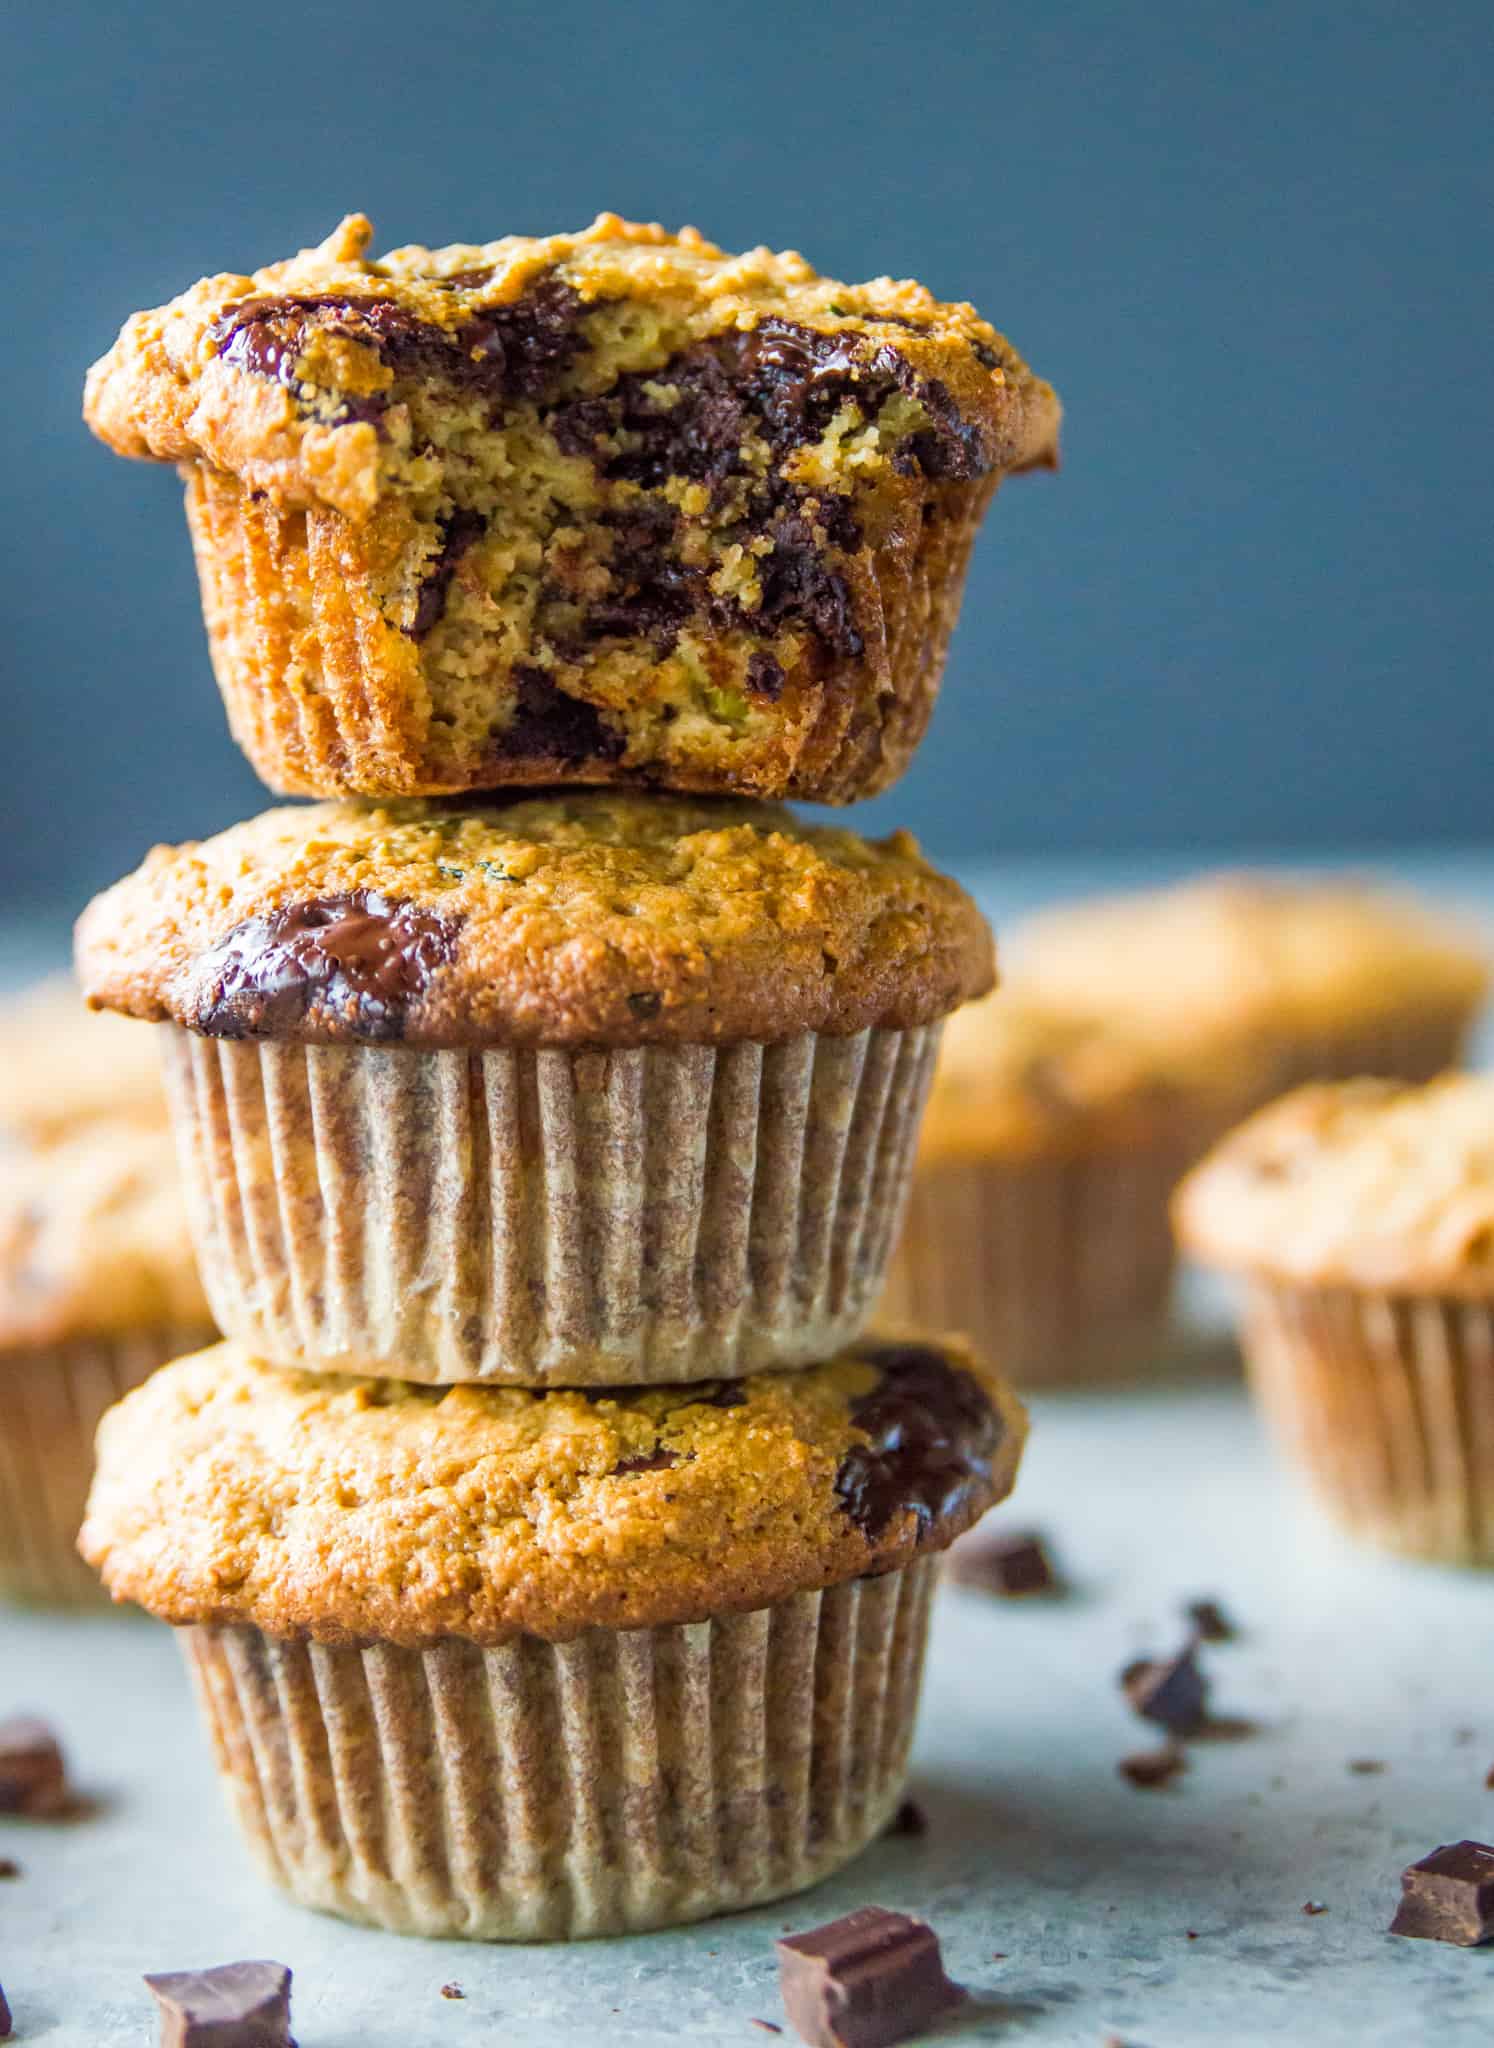 A stack of three paleo zucchini muffins, the top one with a bite out of it showing chunks of chocolate.